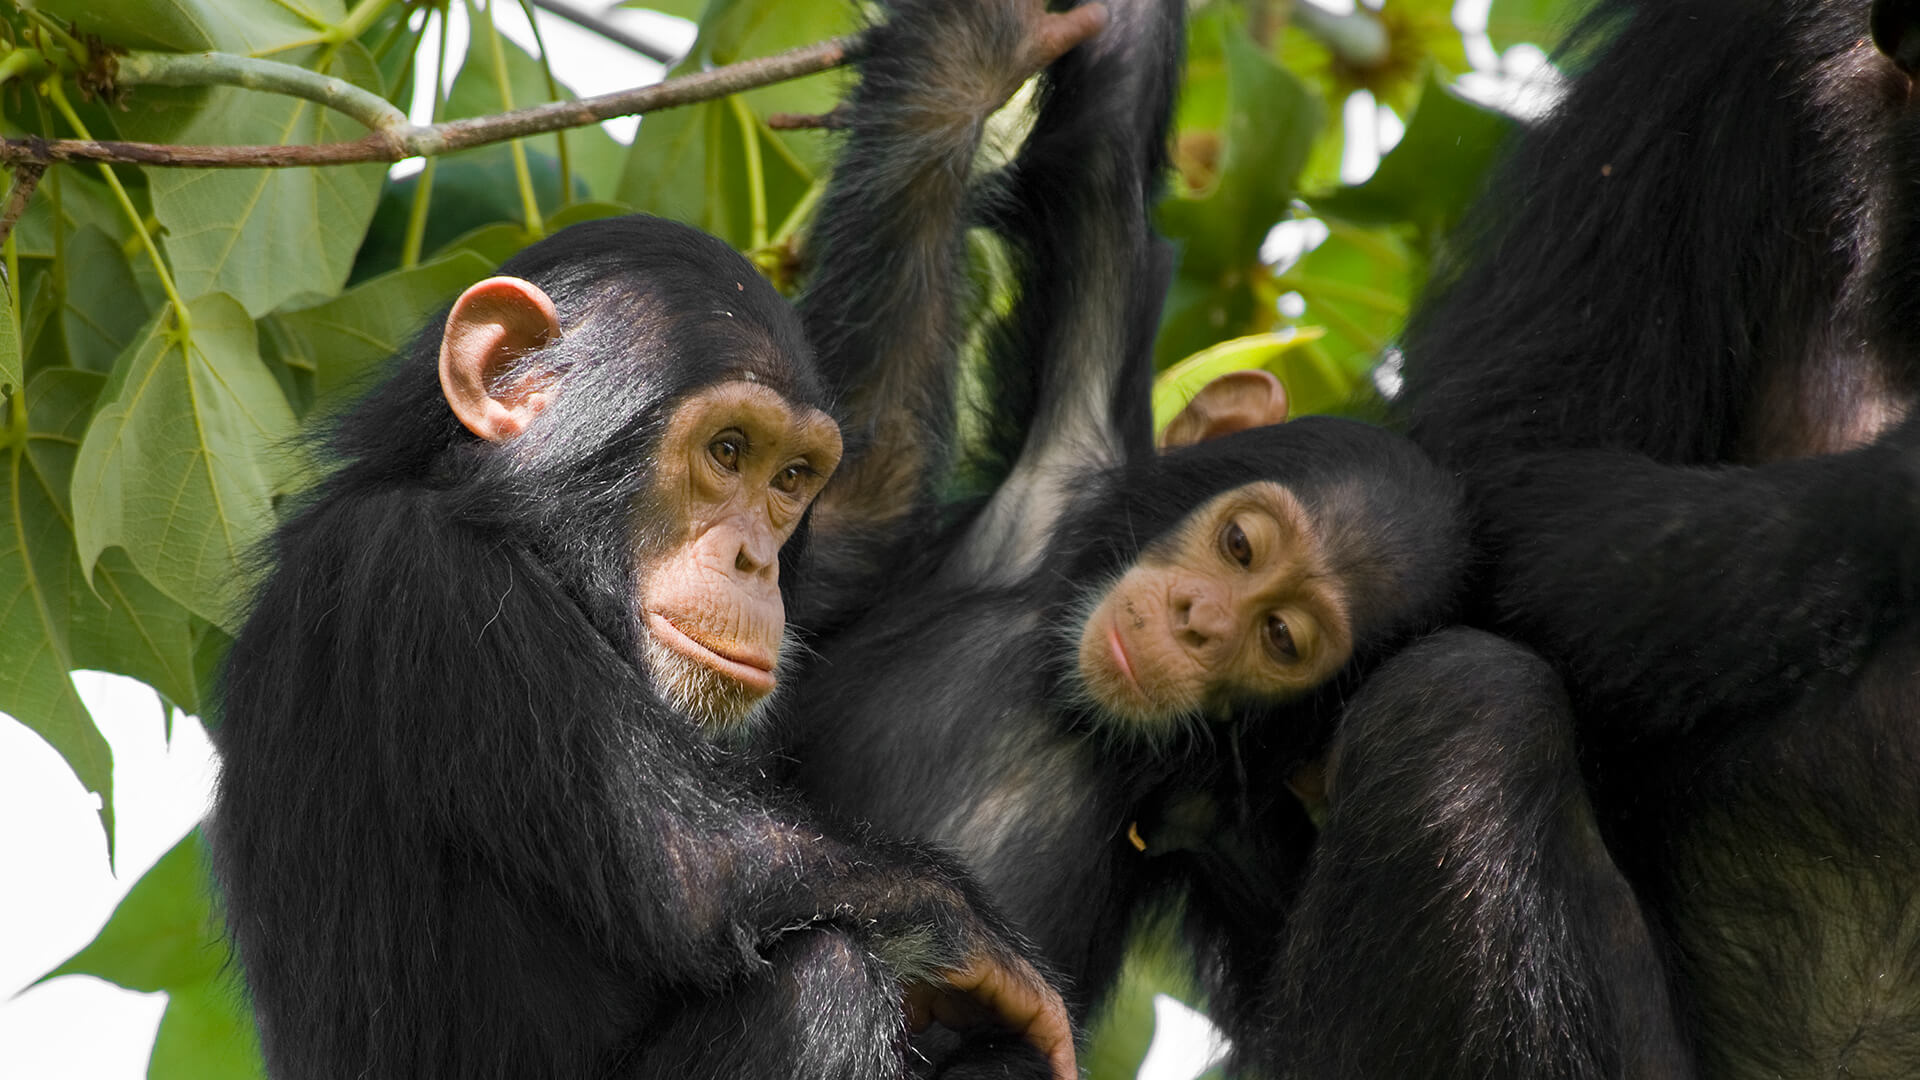 Two young chimpanzees sitting in a green leafy tree next to an adult